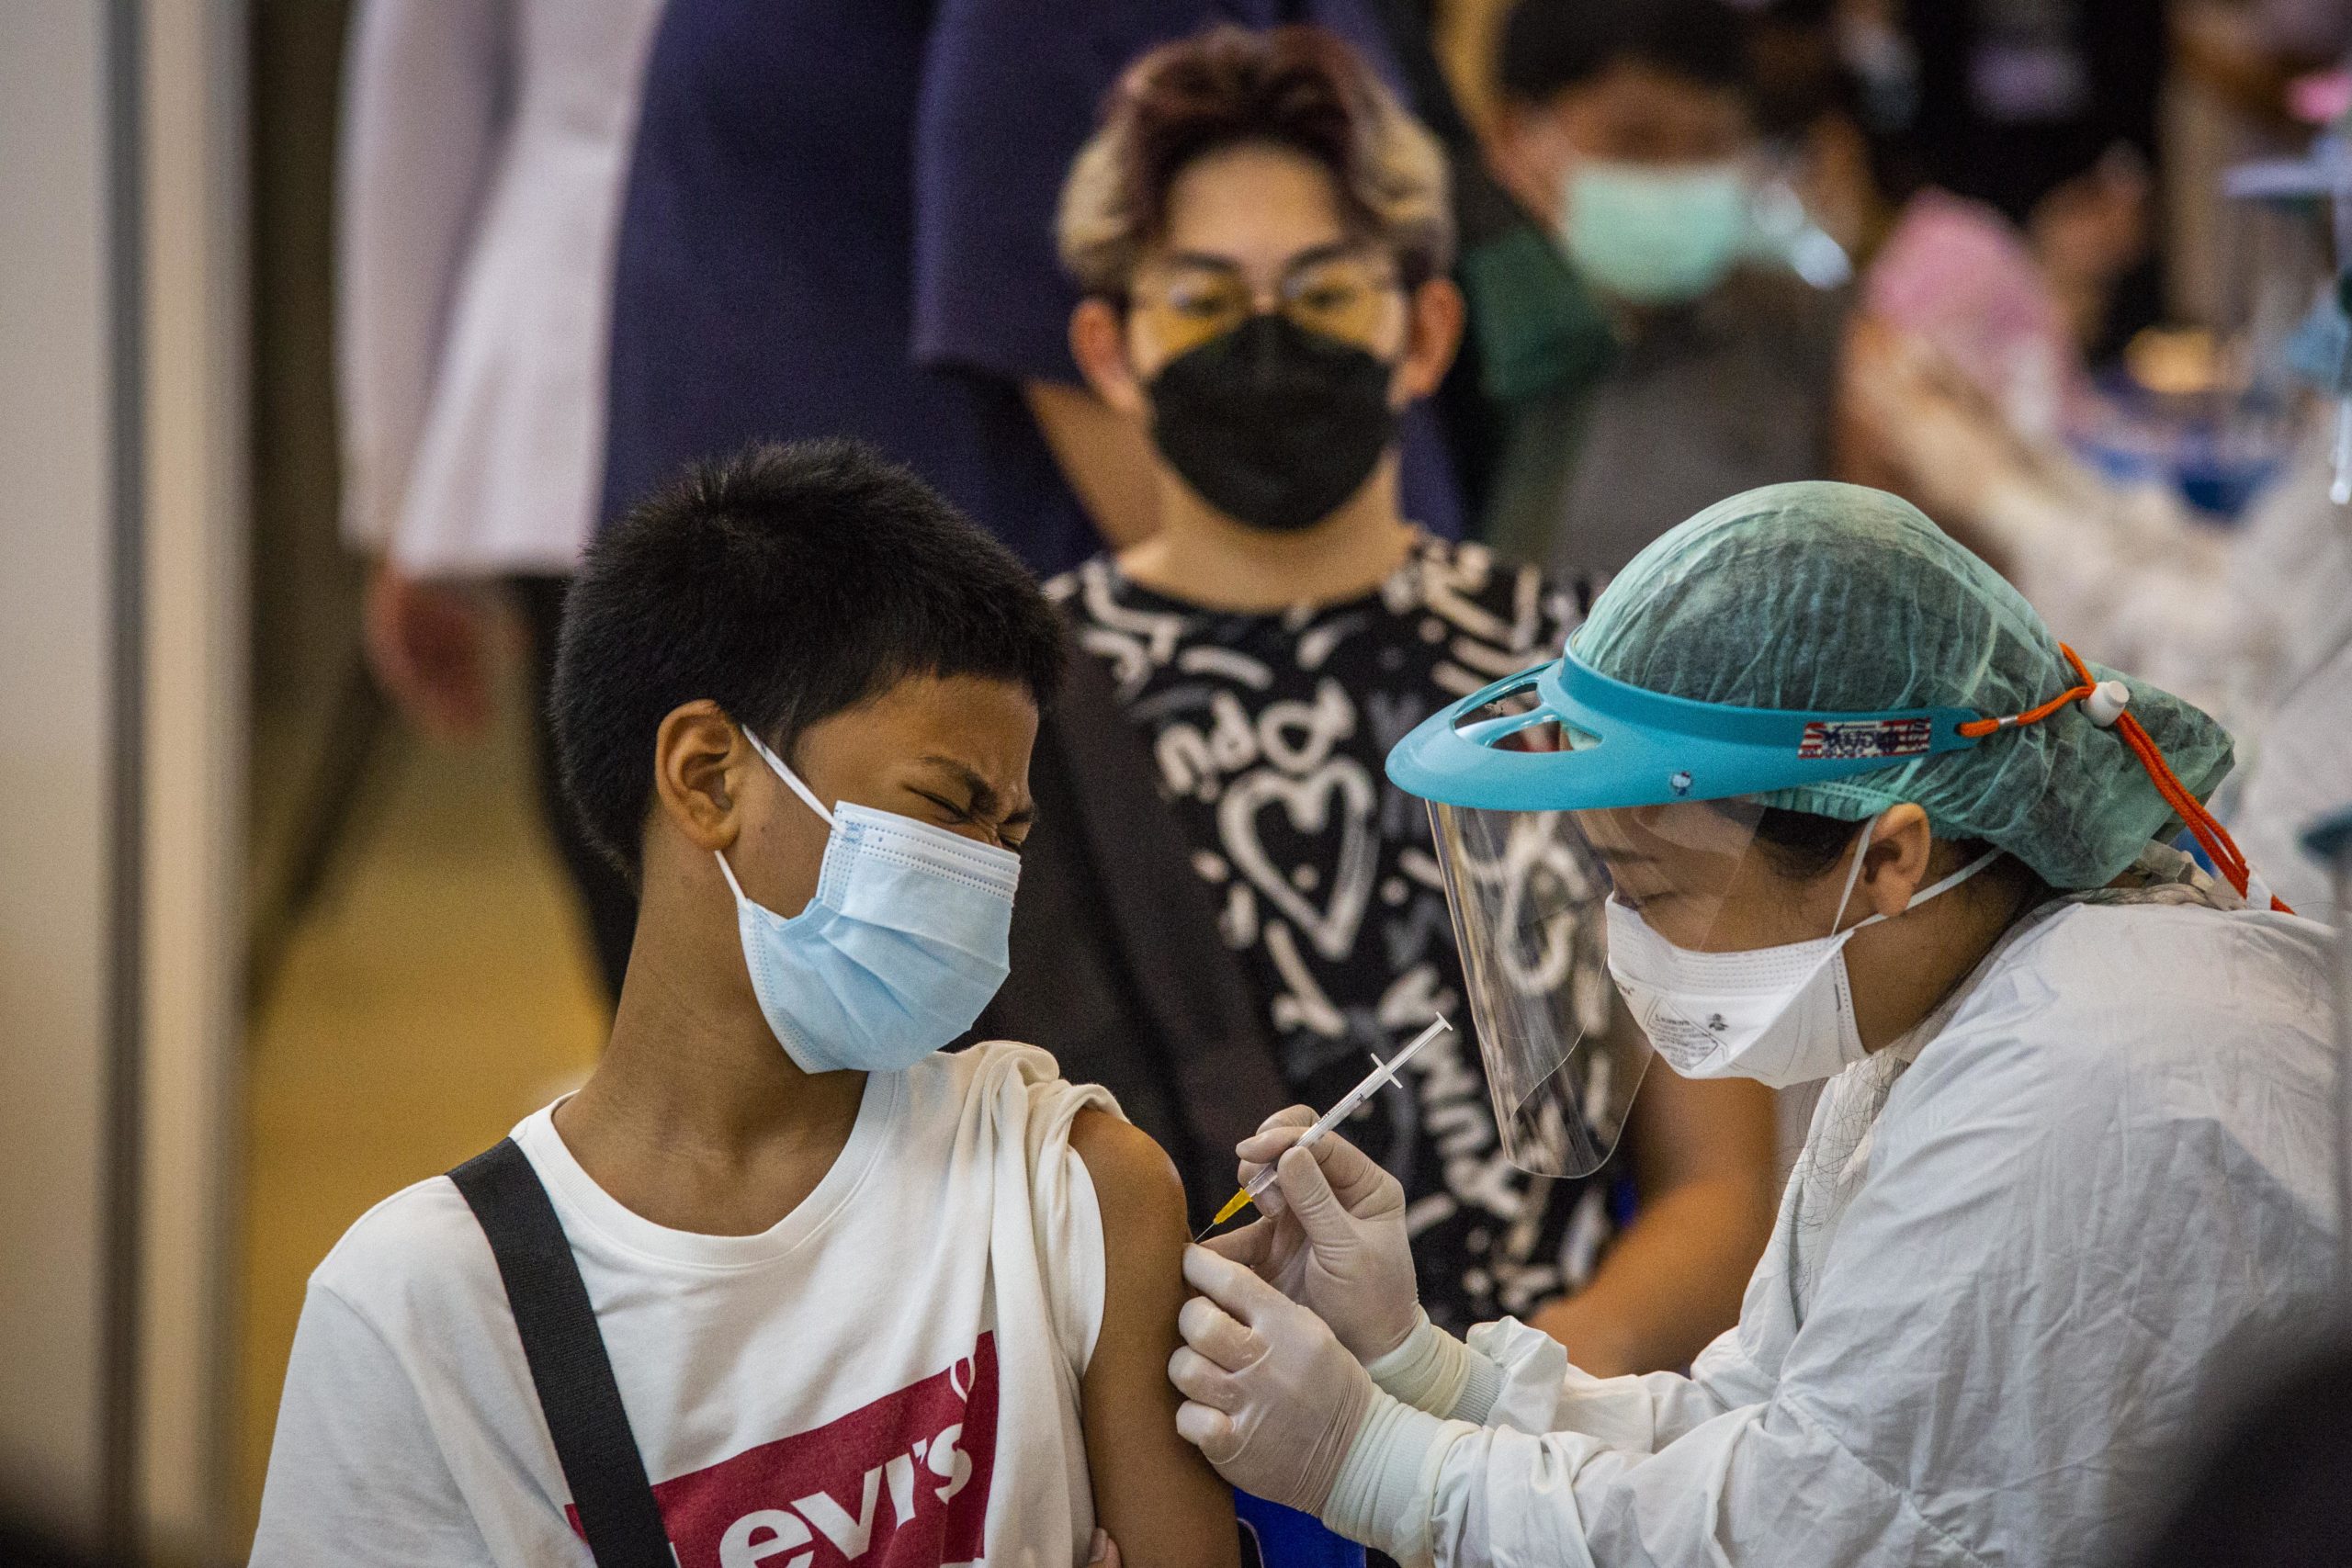 Teenagers receive their first dose of the Pfizer COVID-19 vaccine on Tuesday in Bangkok, Thailand. (Lauren DeCicca/Getty Images)